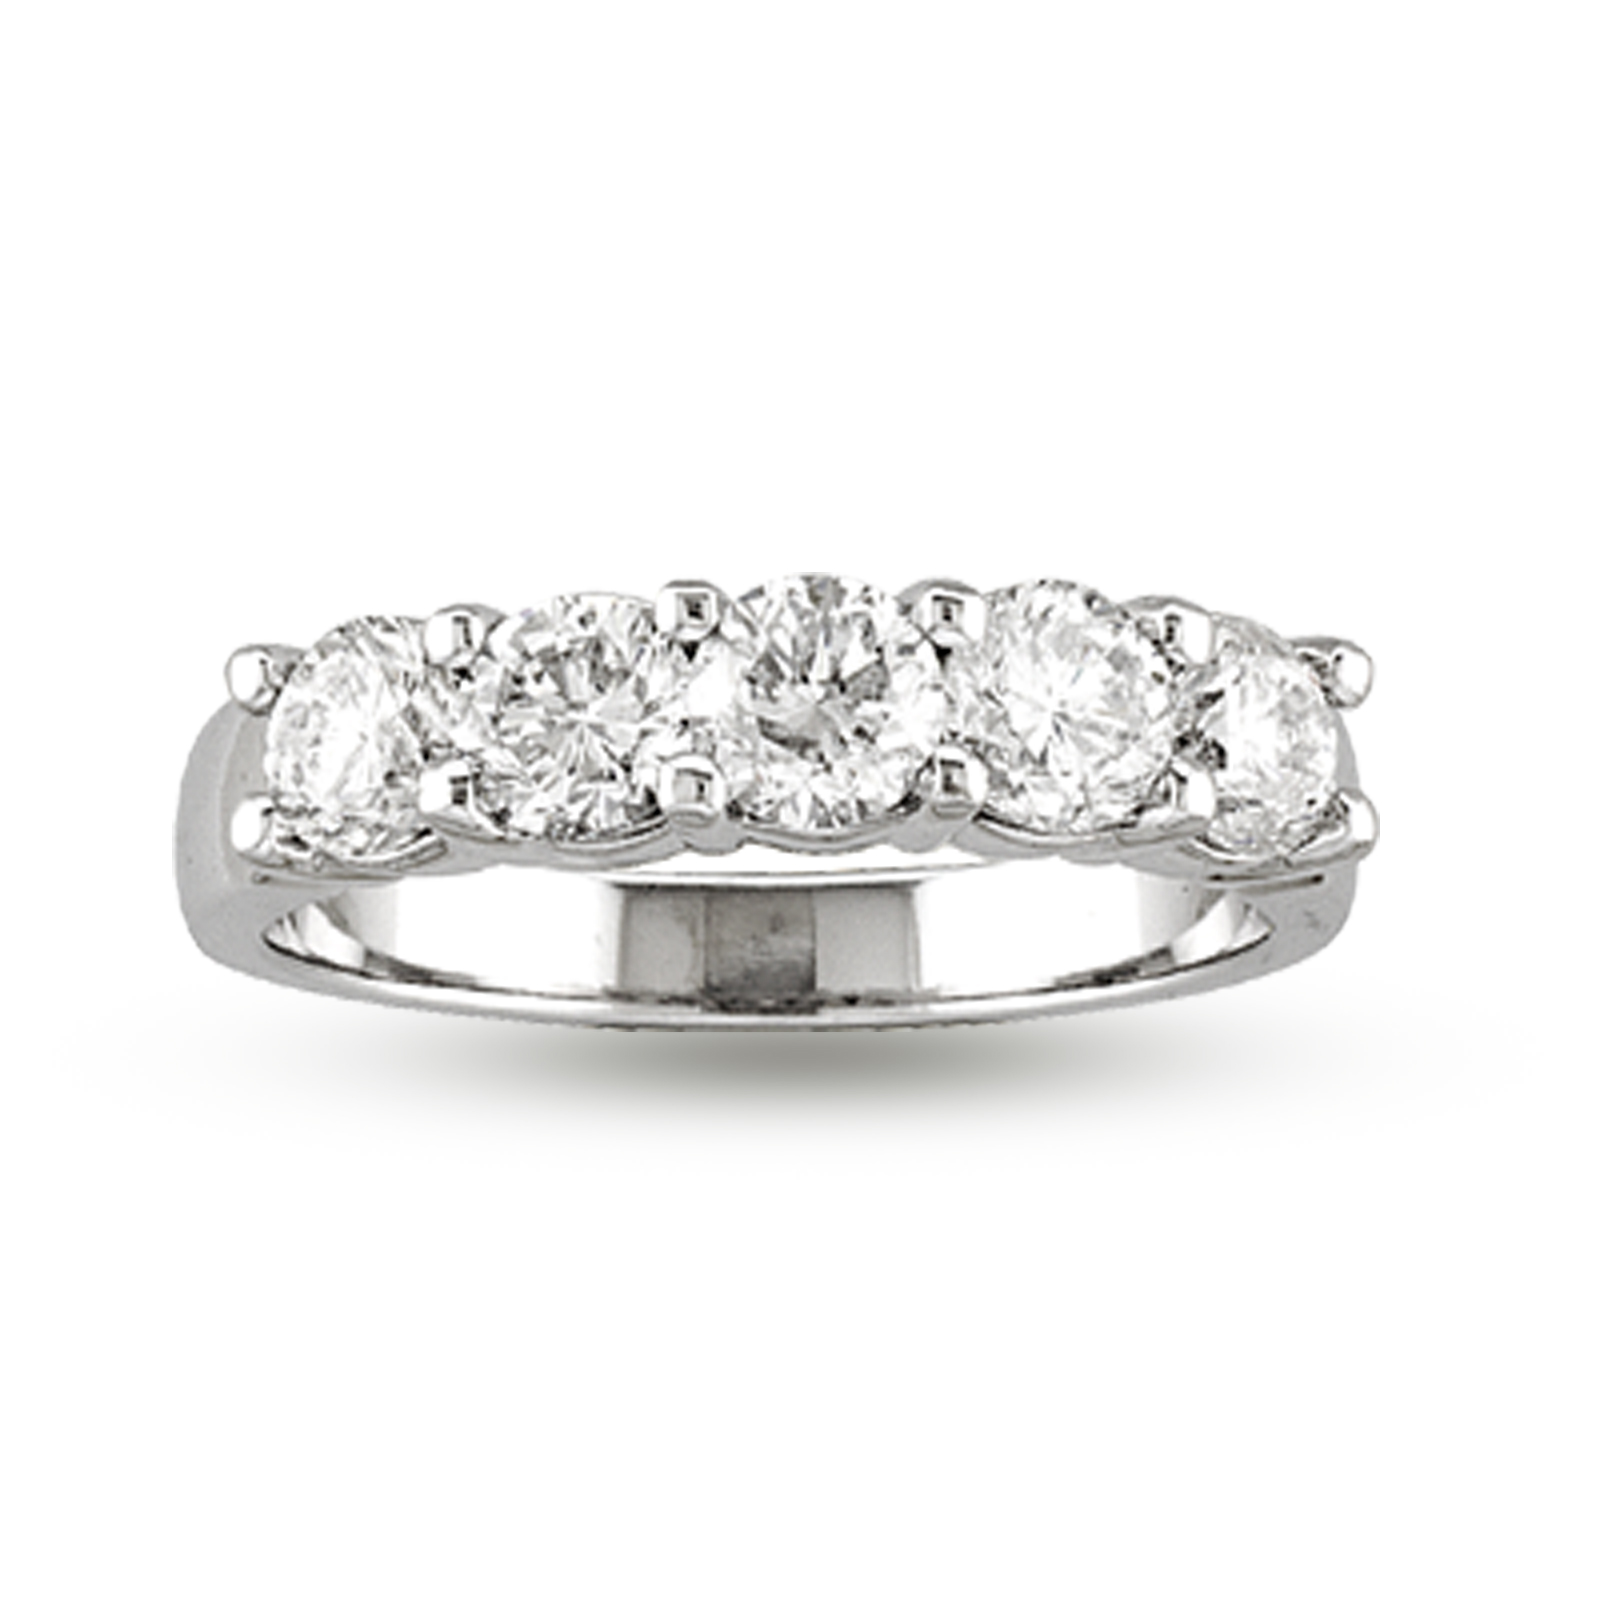 View 1.50ct tw 5 Stone Round Diamonds Shared Prong Anniversary or Wedding Band Bridal Ring H-I SI Quaility 14k Gold 